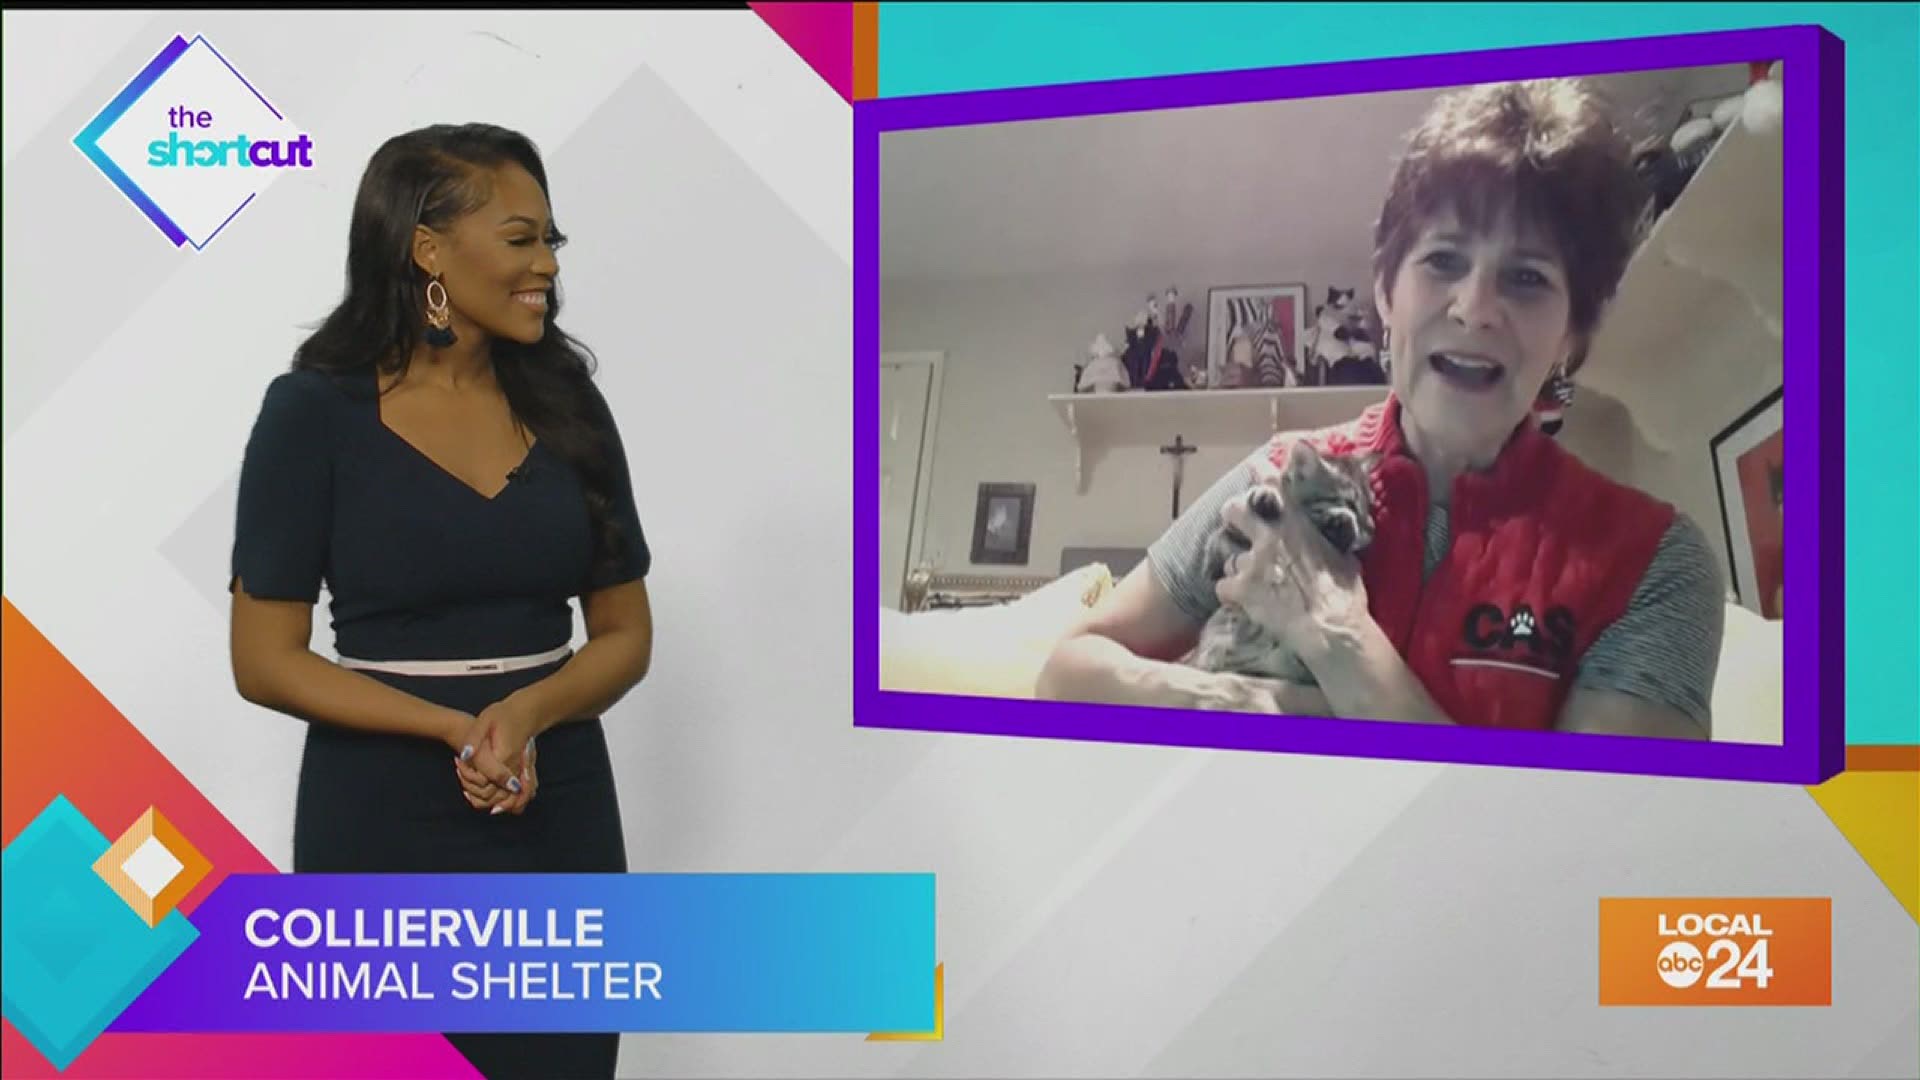 Thinking about adopting a pet at the Collierville Animal Shelter? In that case, join Sydney Neely and guest Nina Wingfield to learn more and meet some cute kittens!